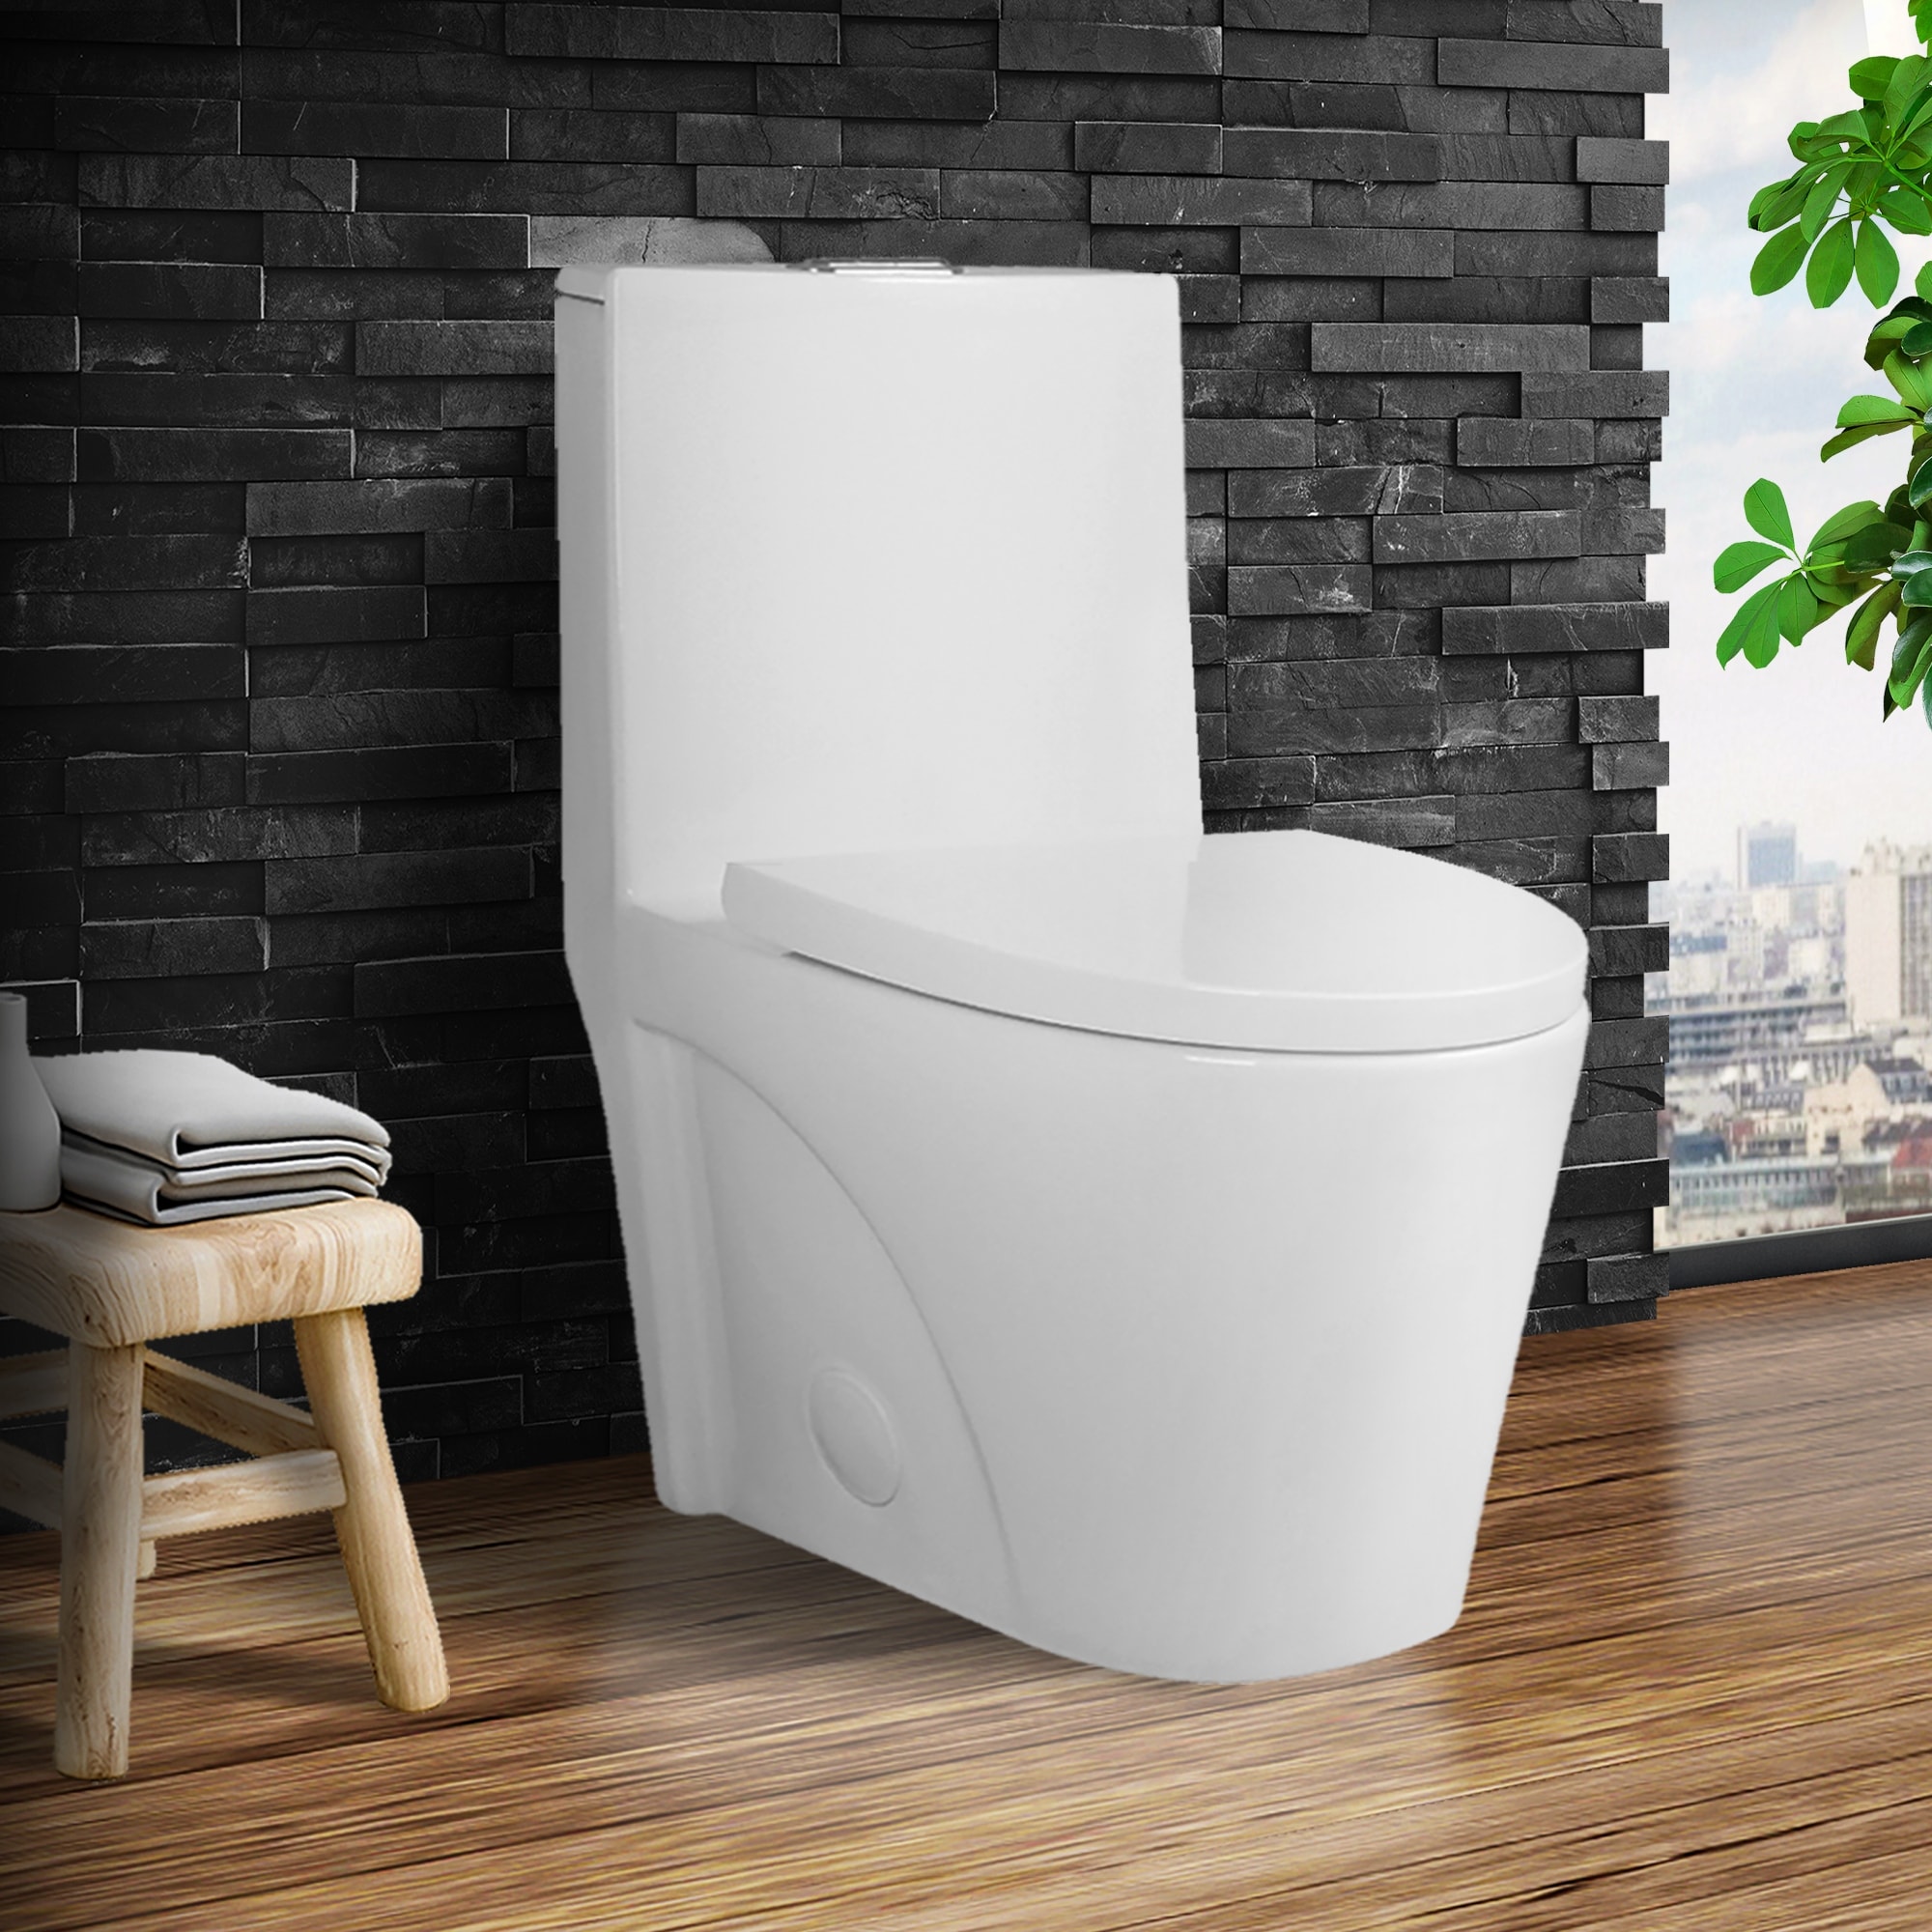 https://ak1.ostkcdn.com/images/products/is/images/direct/3ef00630b9018644f50c979d2a5d8ea03404a71a/Madison-Garden-Dual-Flush-Elongated-One-Piece-Toilet-with-High-Efficiency-Flush.jpg